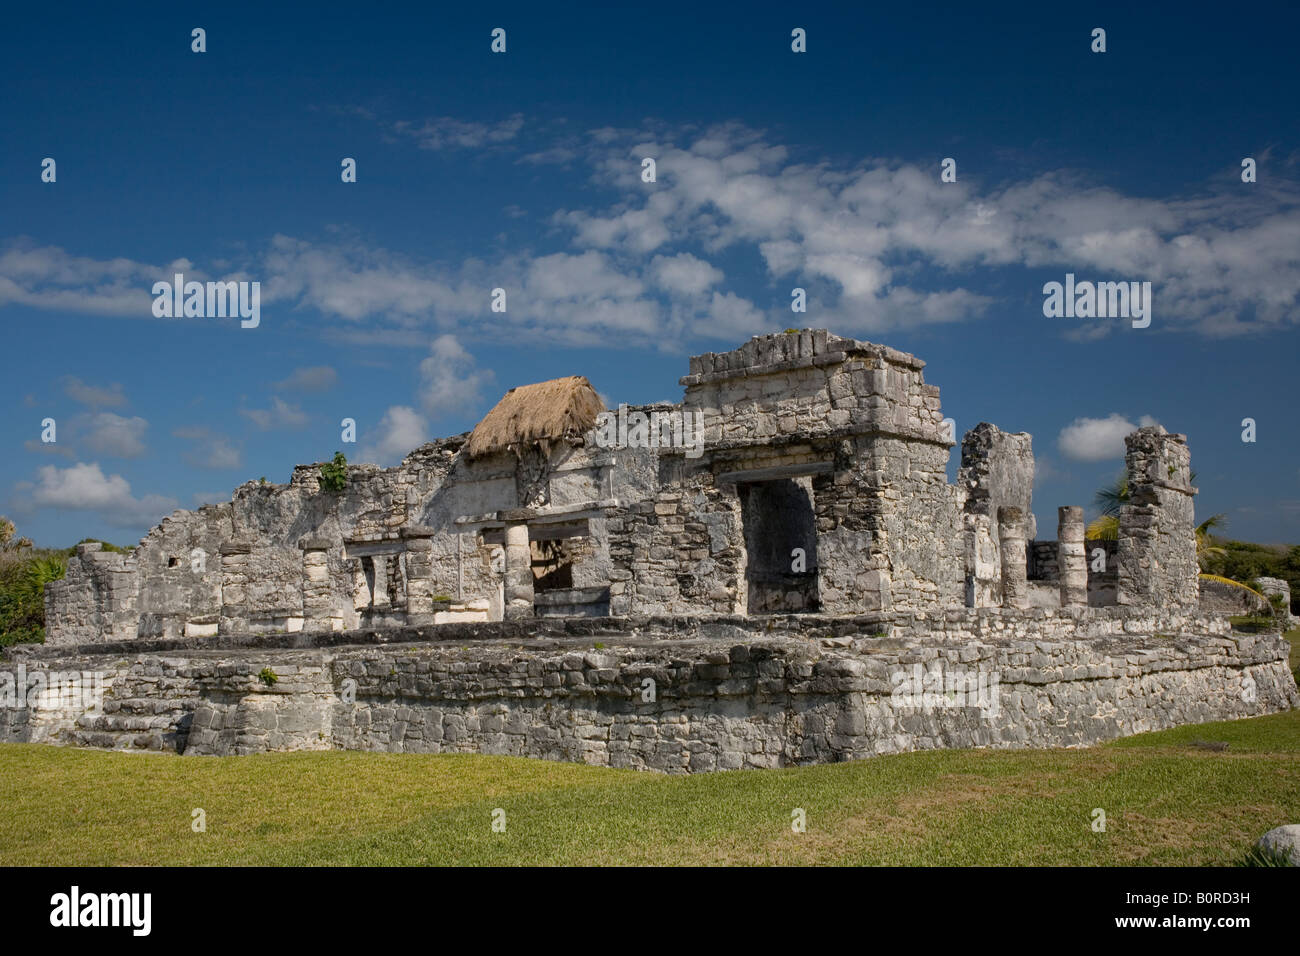 General Aspect of Tulum archaeological site on a bright sunny day with blue sky and white clouds. Stock Photo